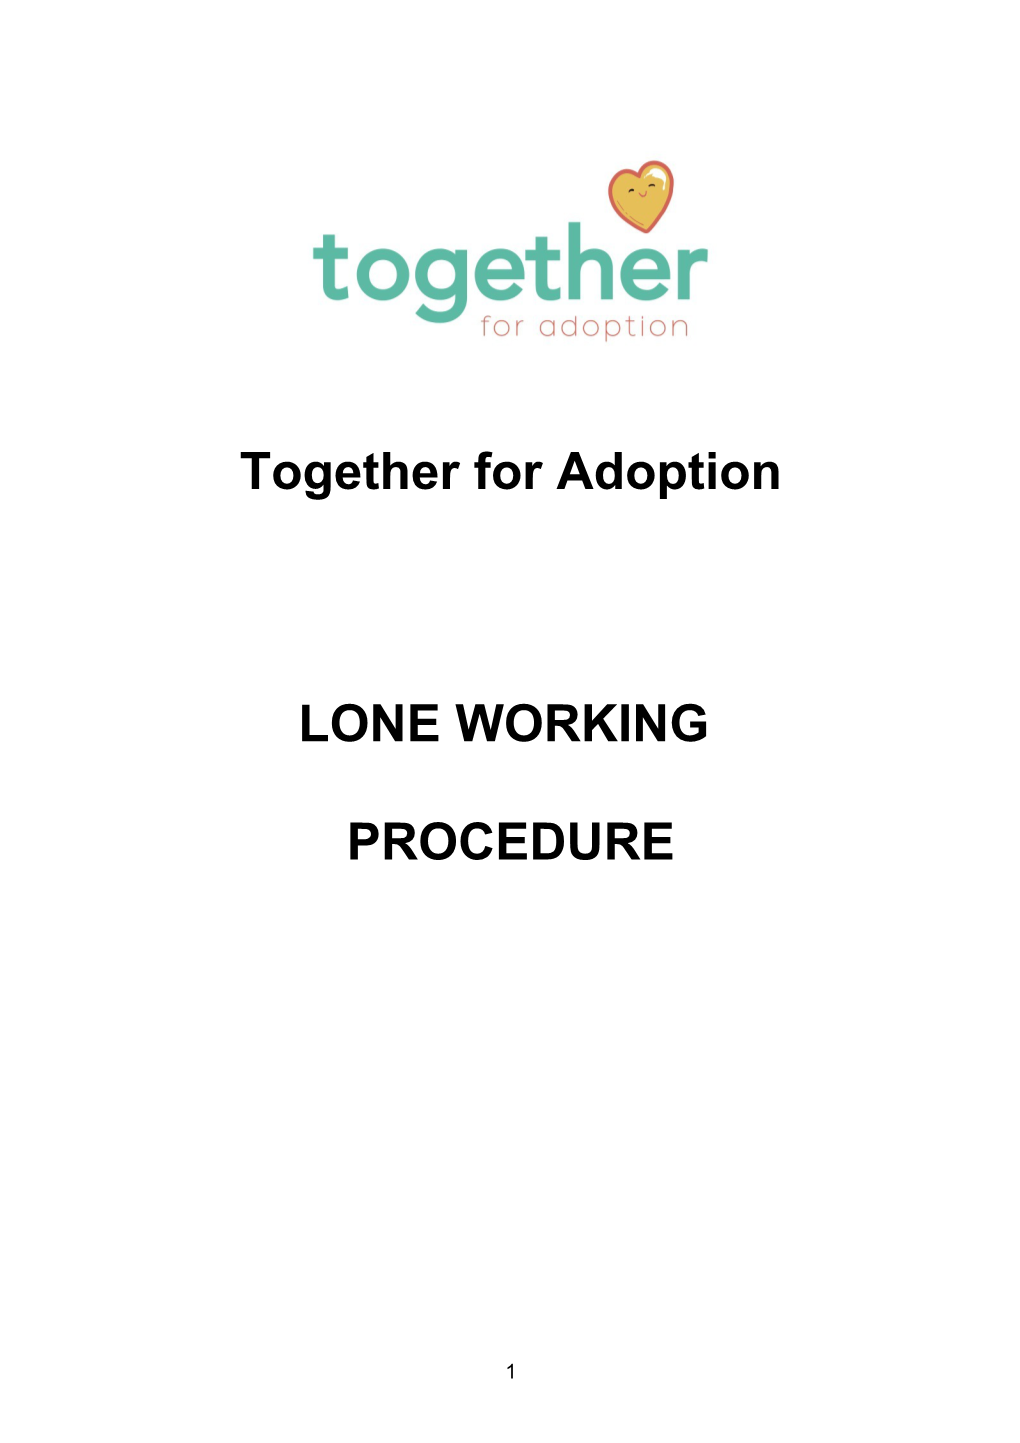 Lone Working Procedure for Social Workers